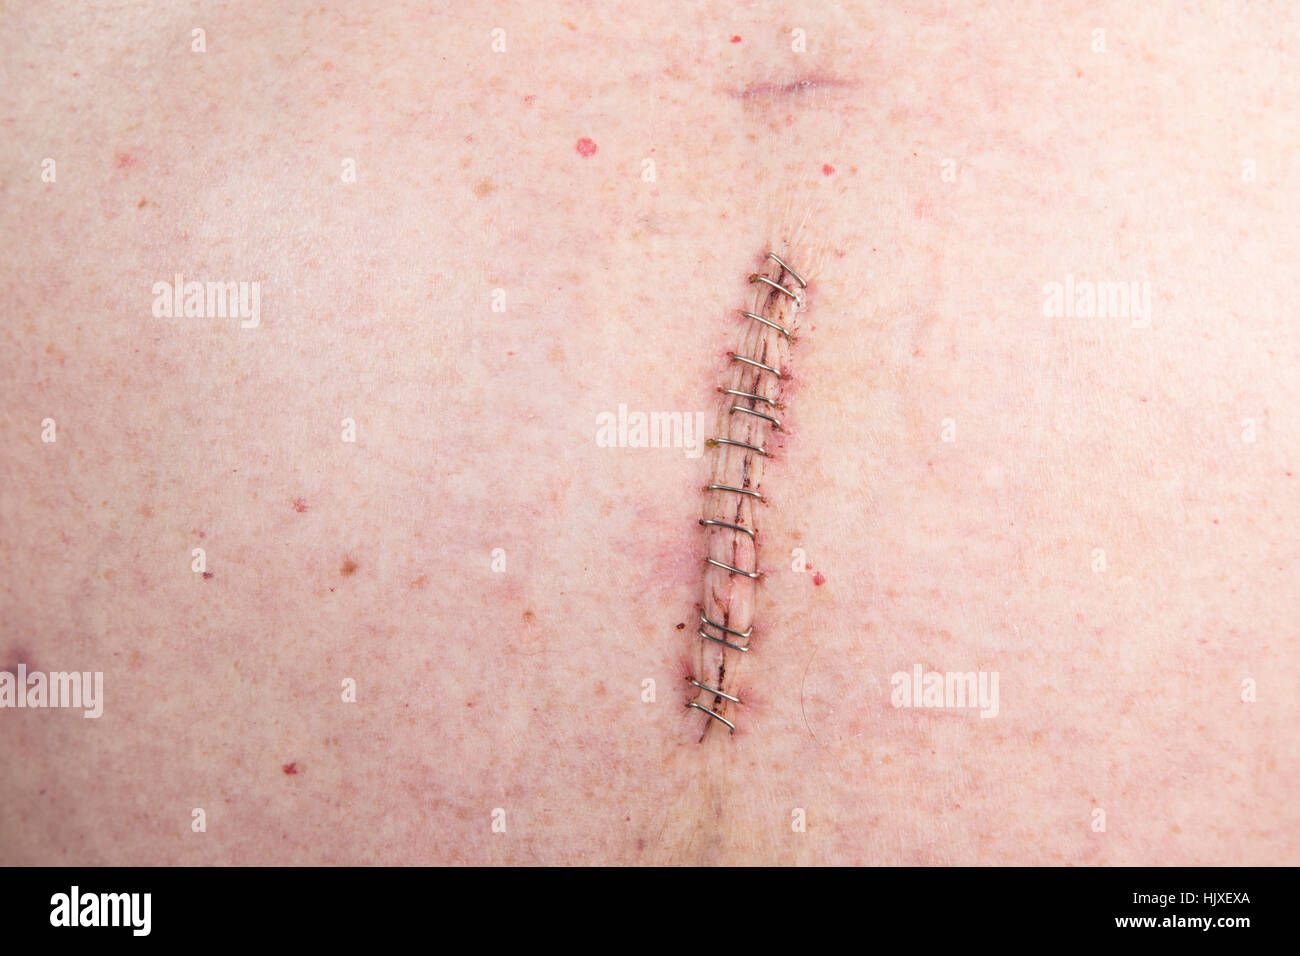 Stapled wound after Gastric Hernia Surgery Stock Photo